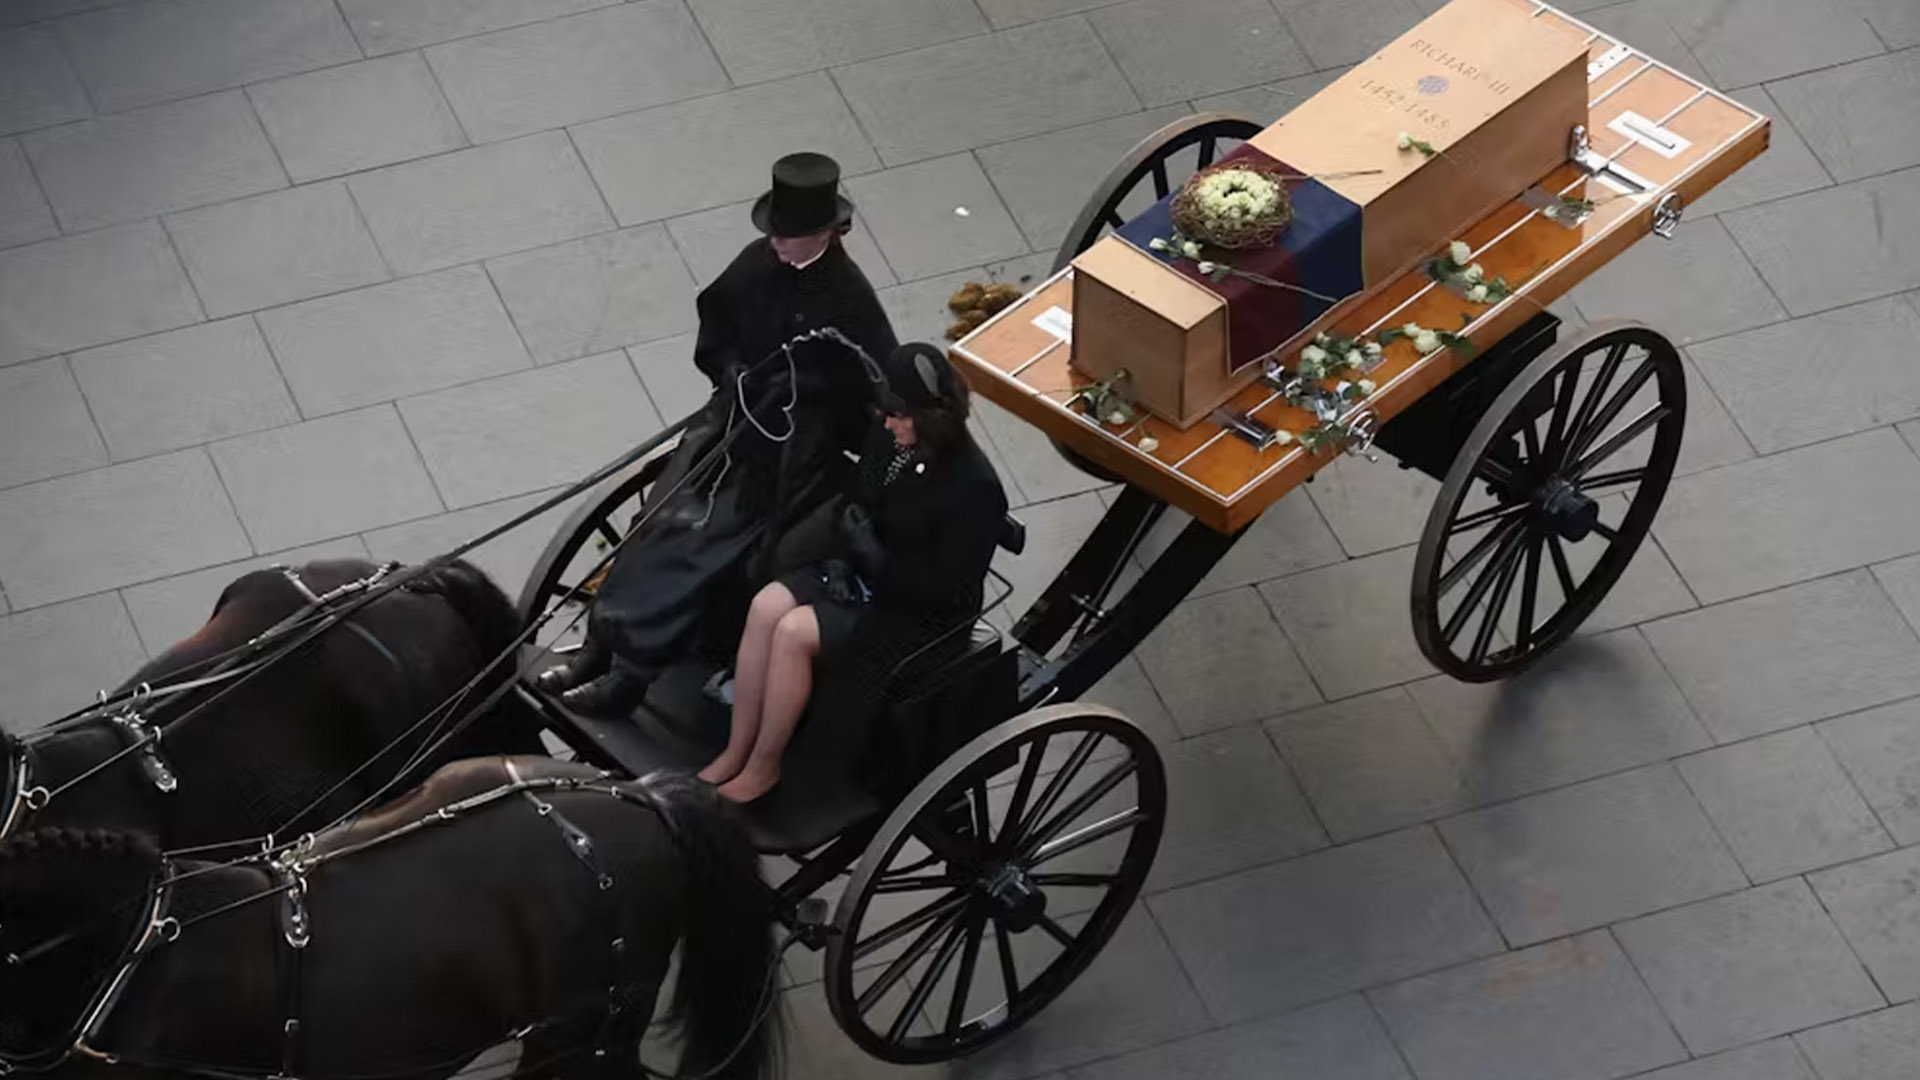 horse and carriage shown pulling a coffin on a flat platform; two people dressed in black are sitting in the open carriage